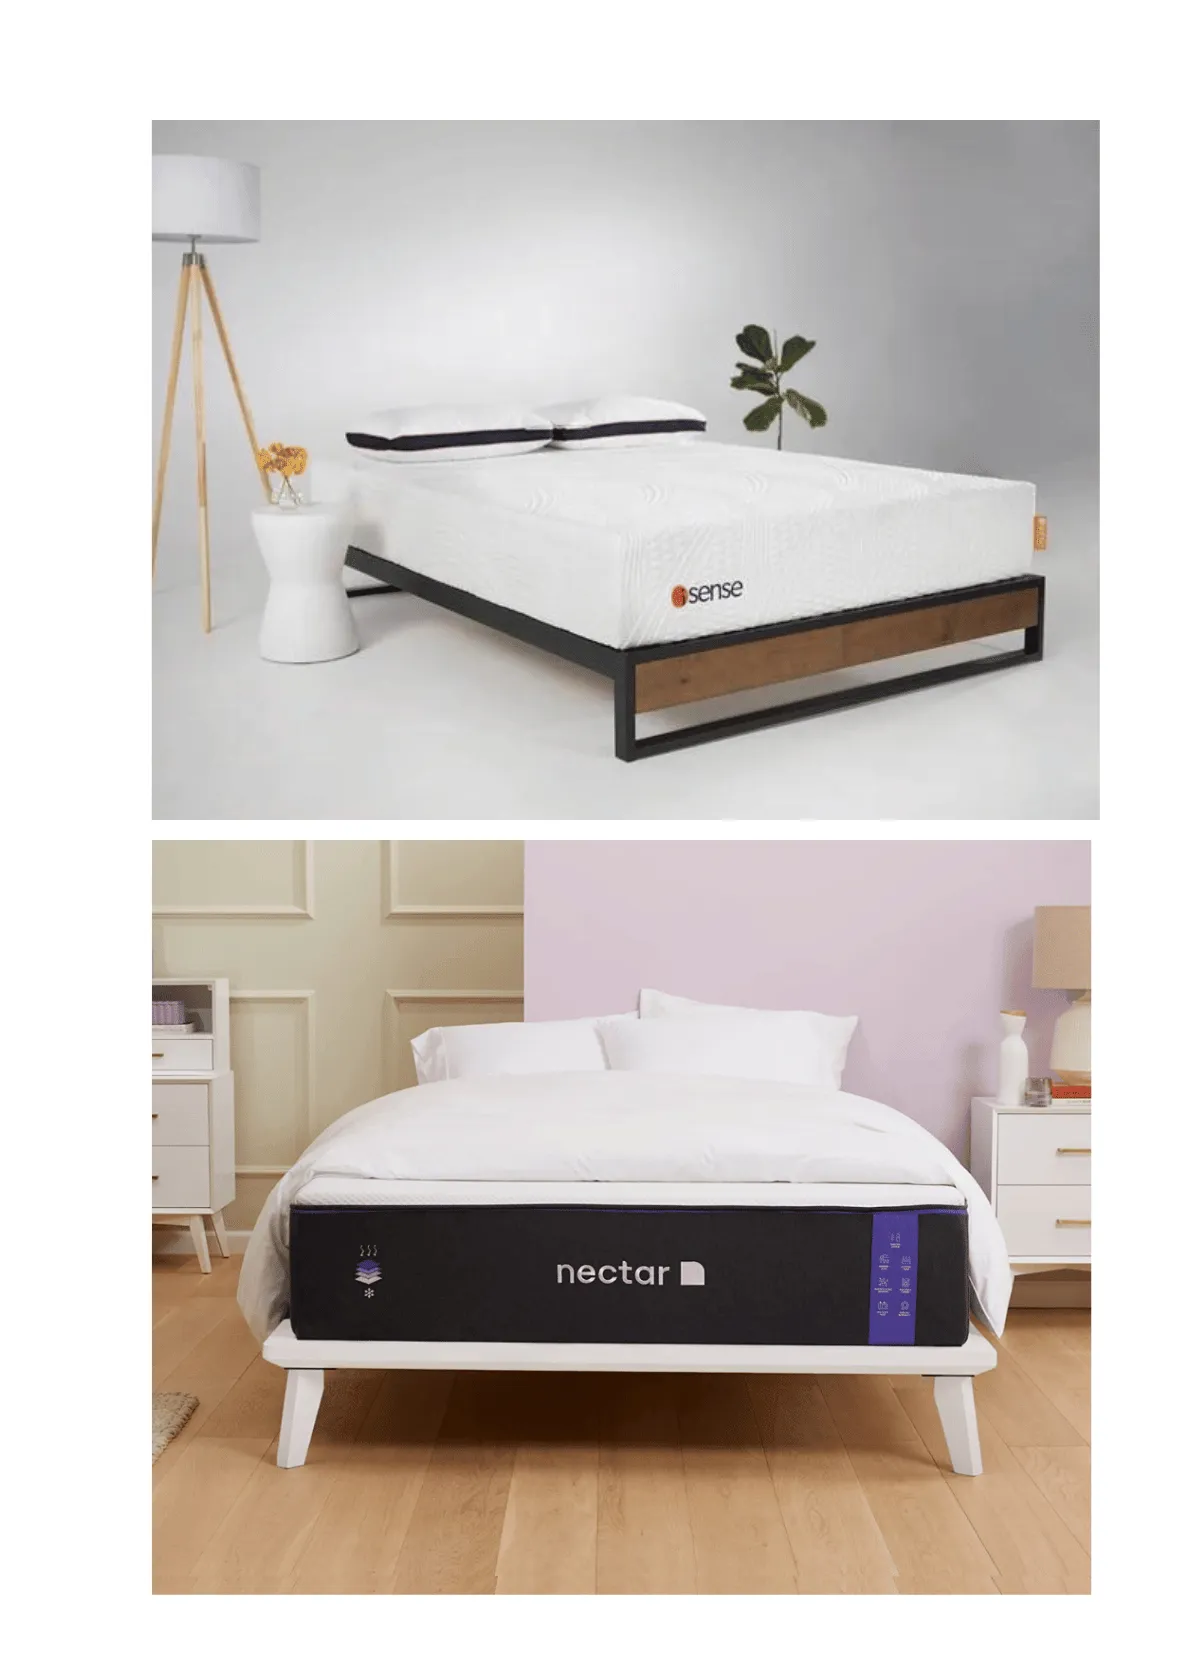 "How Much Does a Mattress Cost [for Your Budget or Style]?"